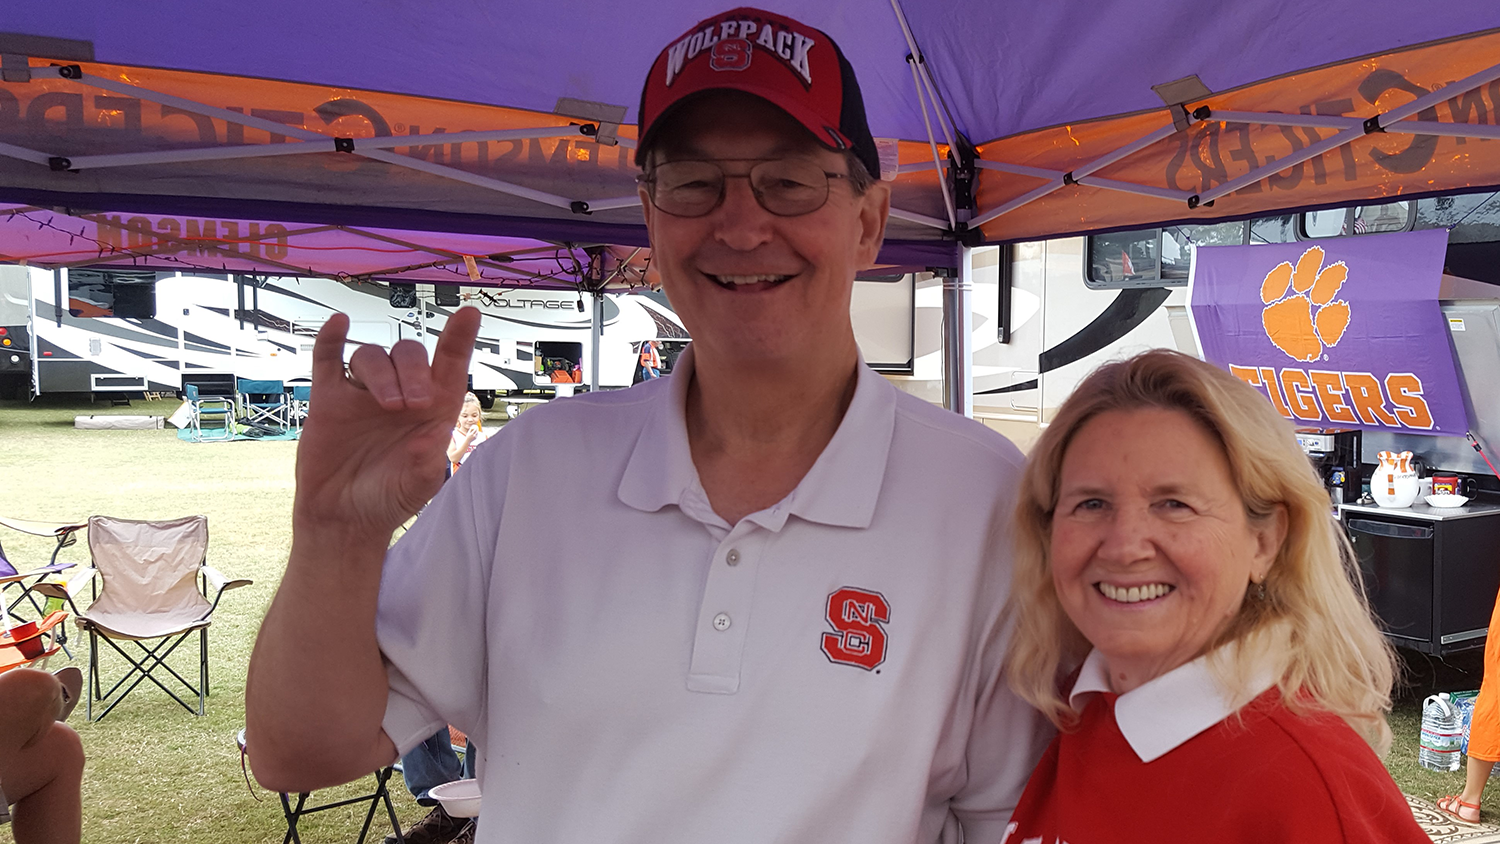 Melton puts up wolfies at event - Paper Science Alumni Establishes a Scholarship to Honor Mother - College of Natural Resources News NC State University